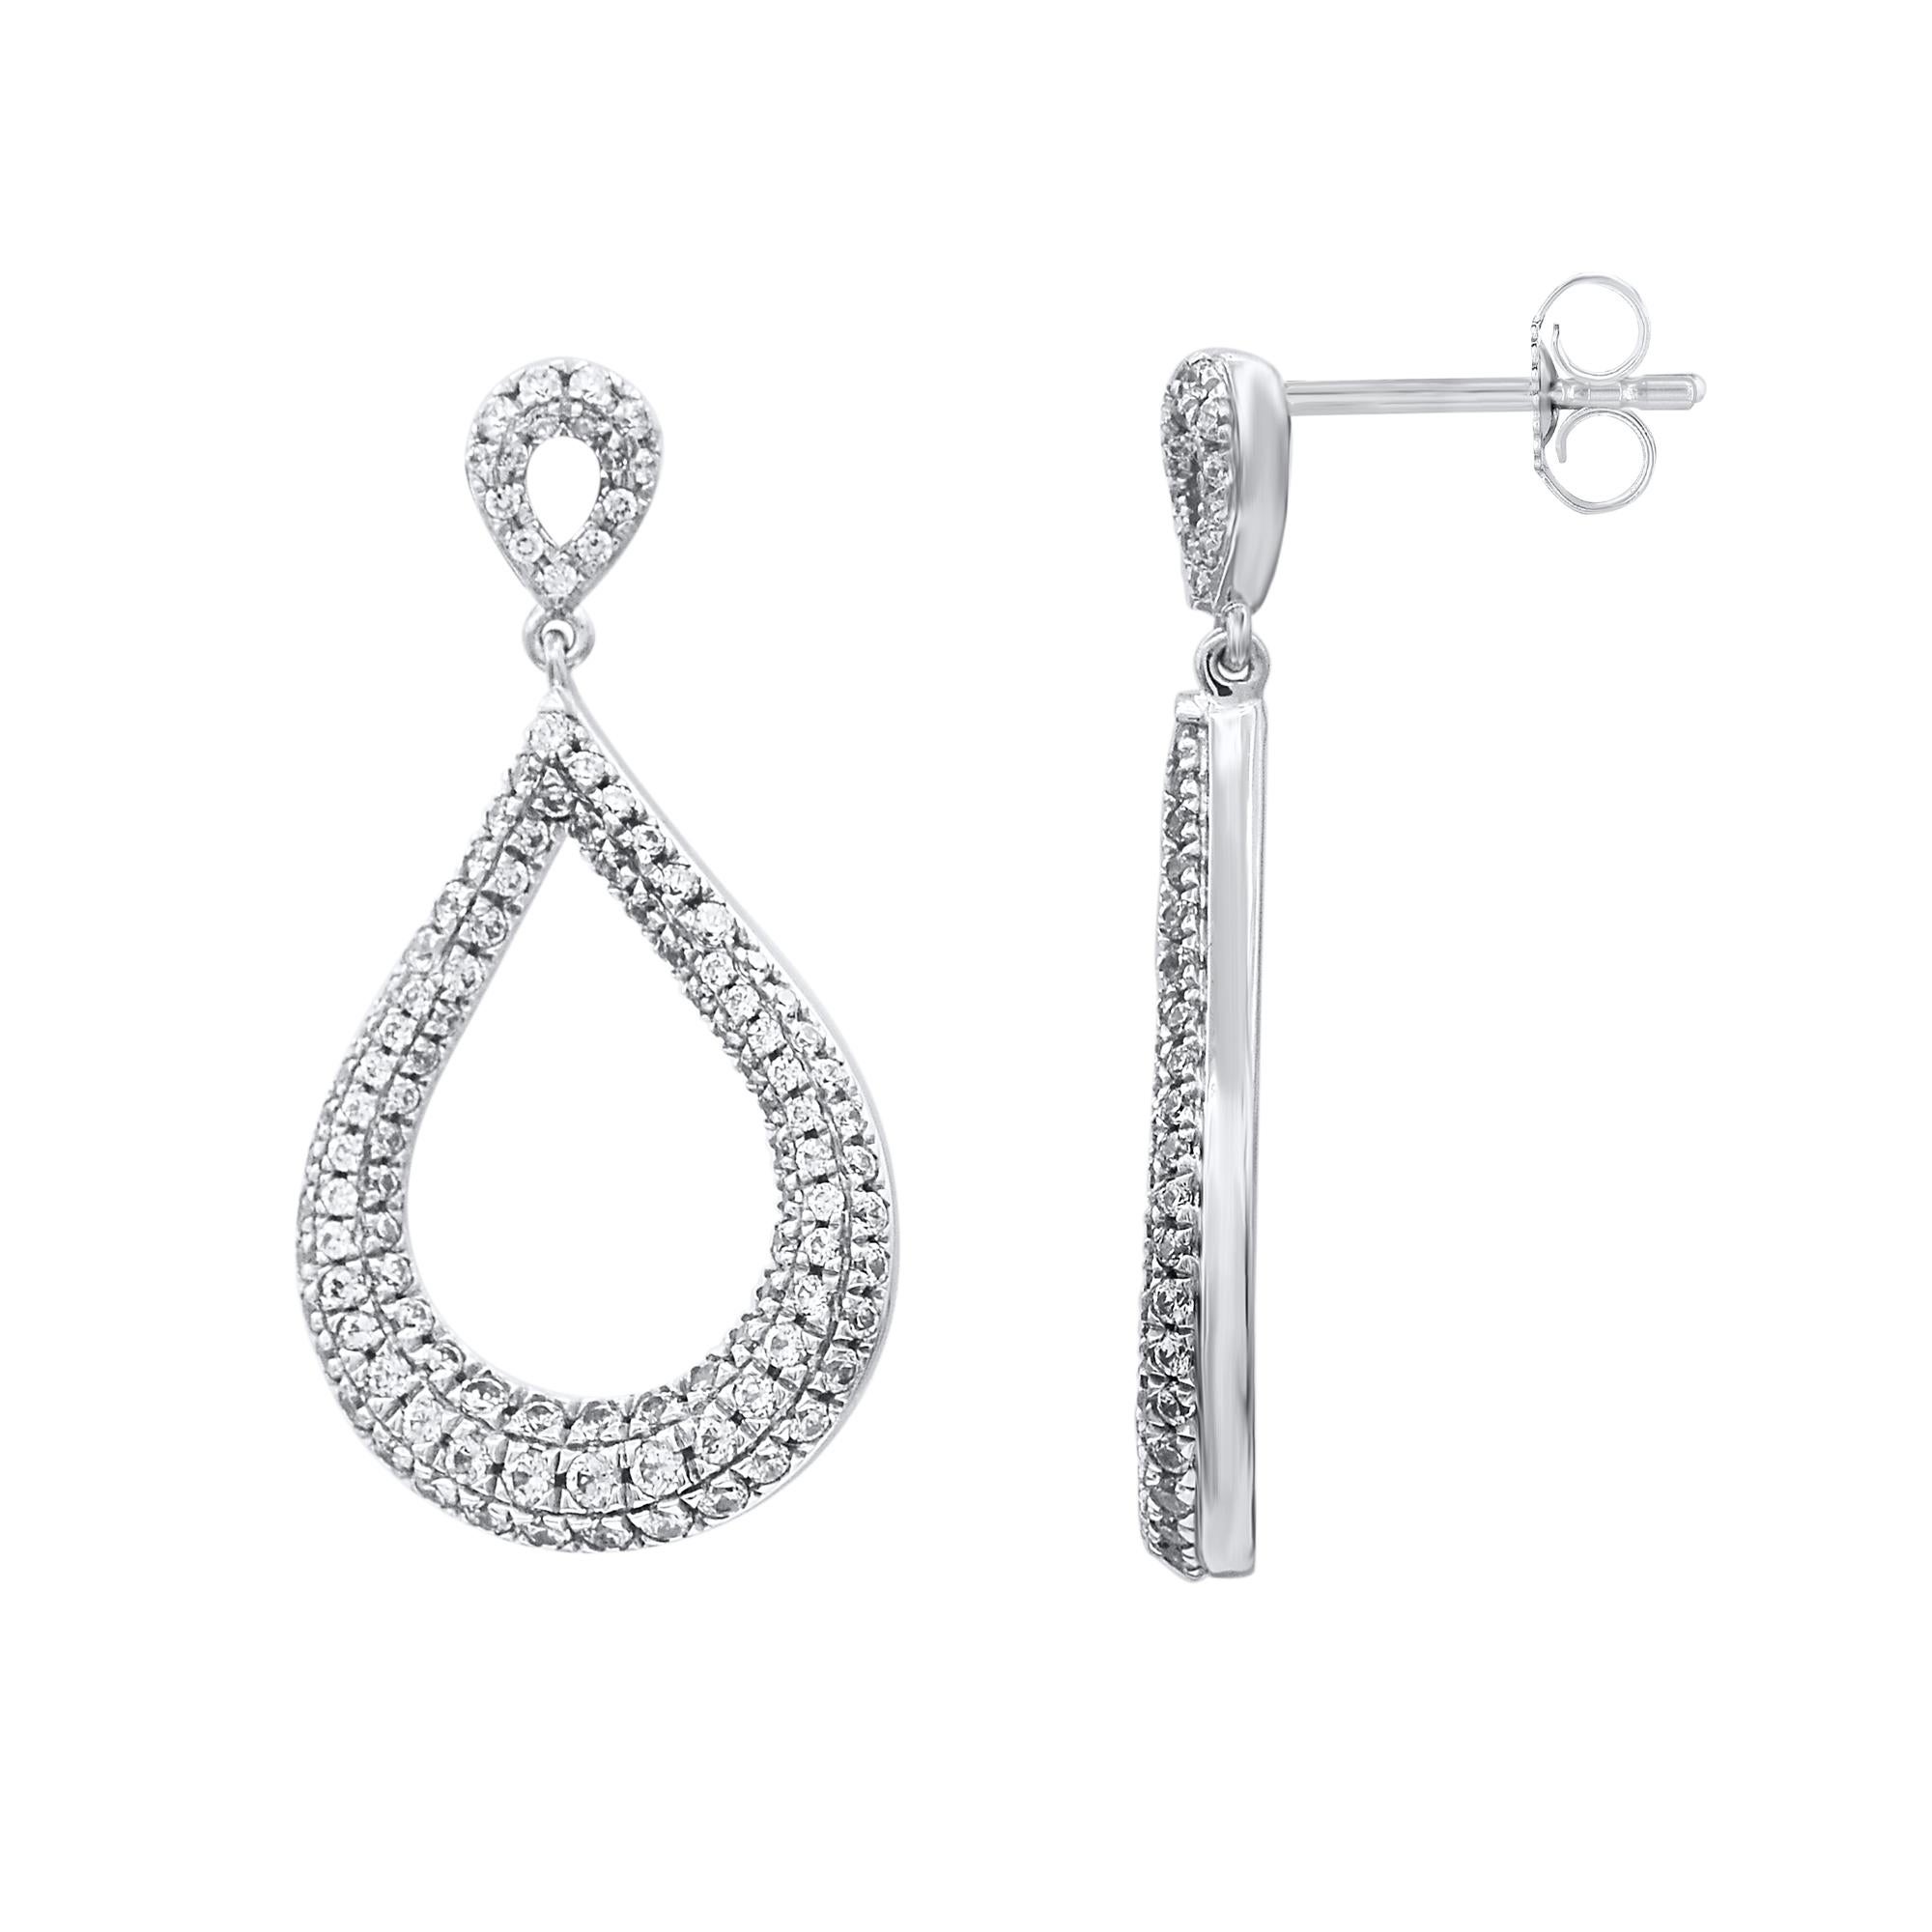 Update your evening look with these playful diamond drop earrings. These beautiful 14 karat white gold earrings are studded with 228 brilliant cut and single cut natural diamonds in prong settings and earring secure with post back. Total diamond